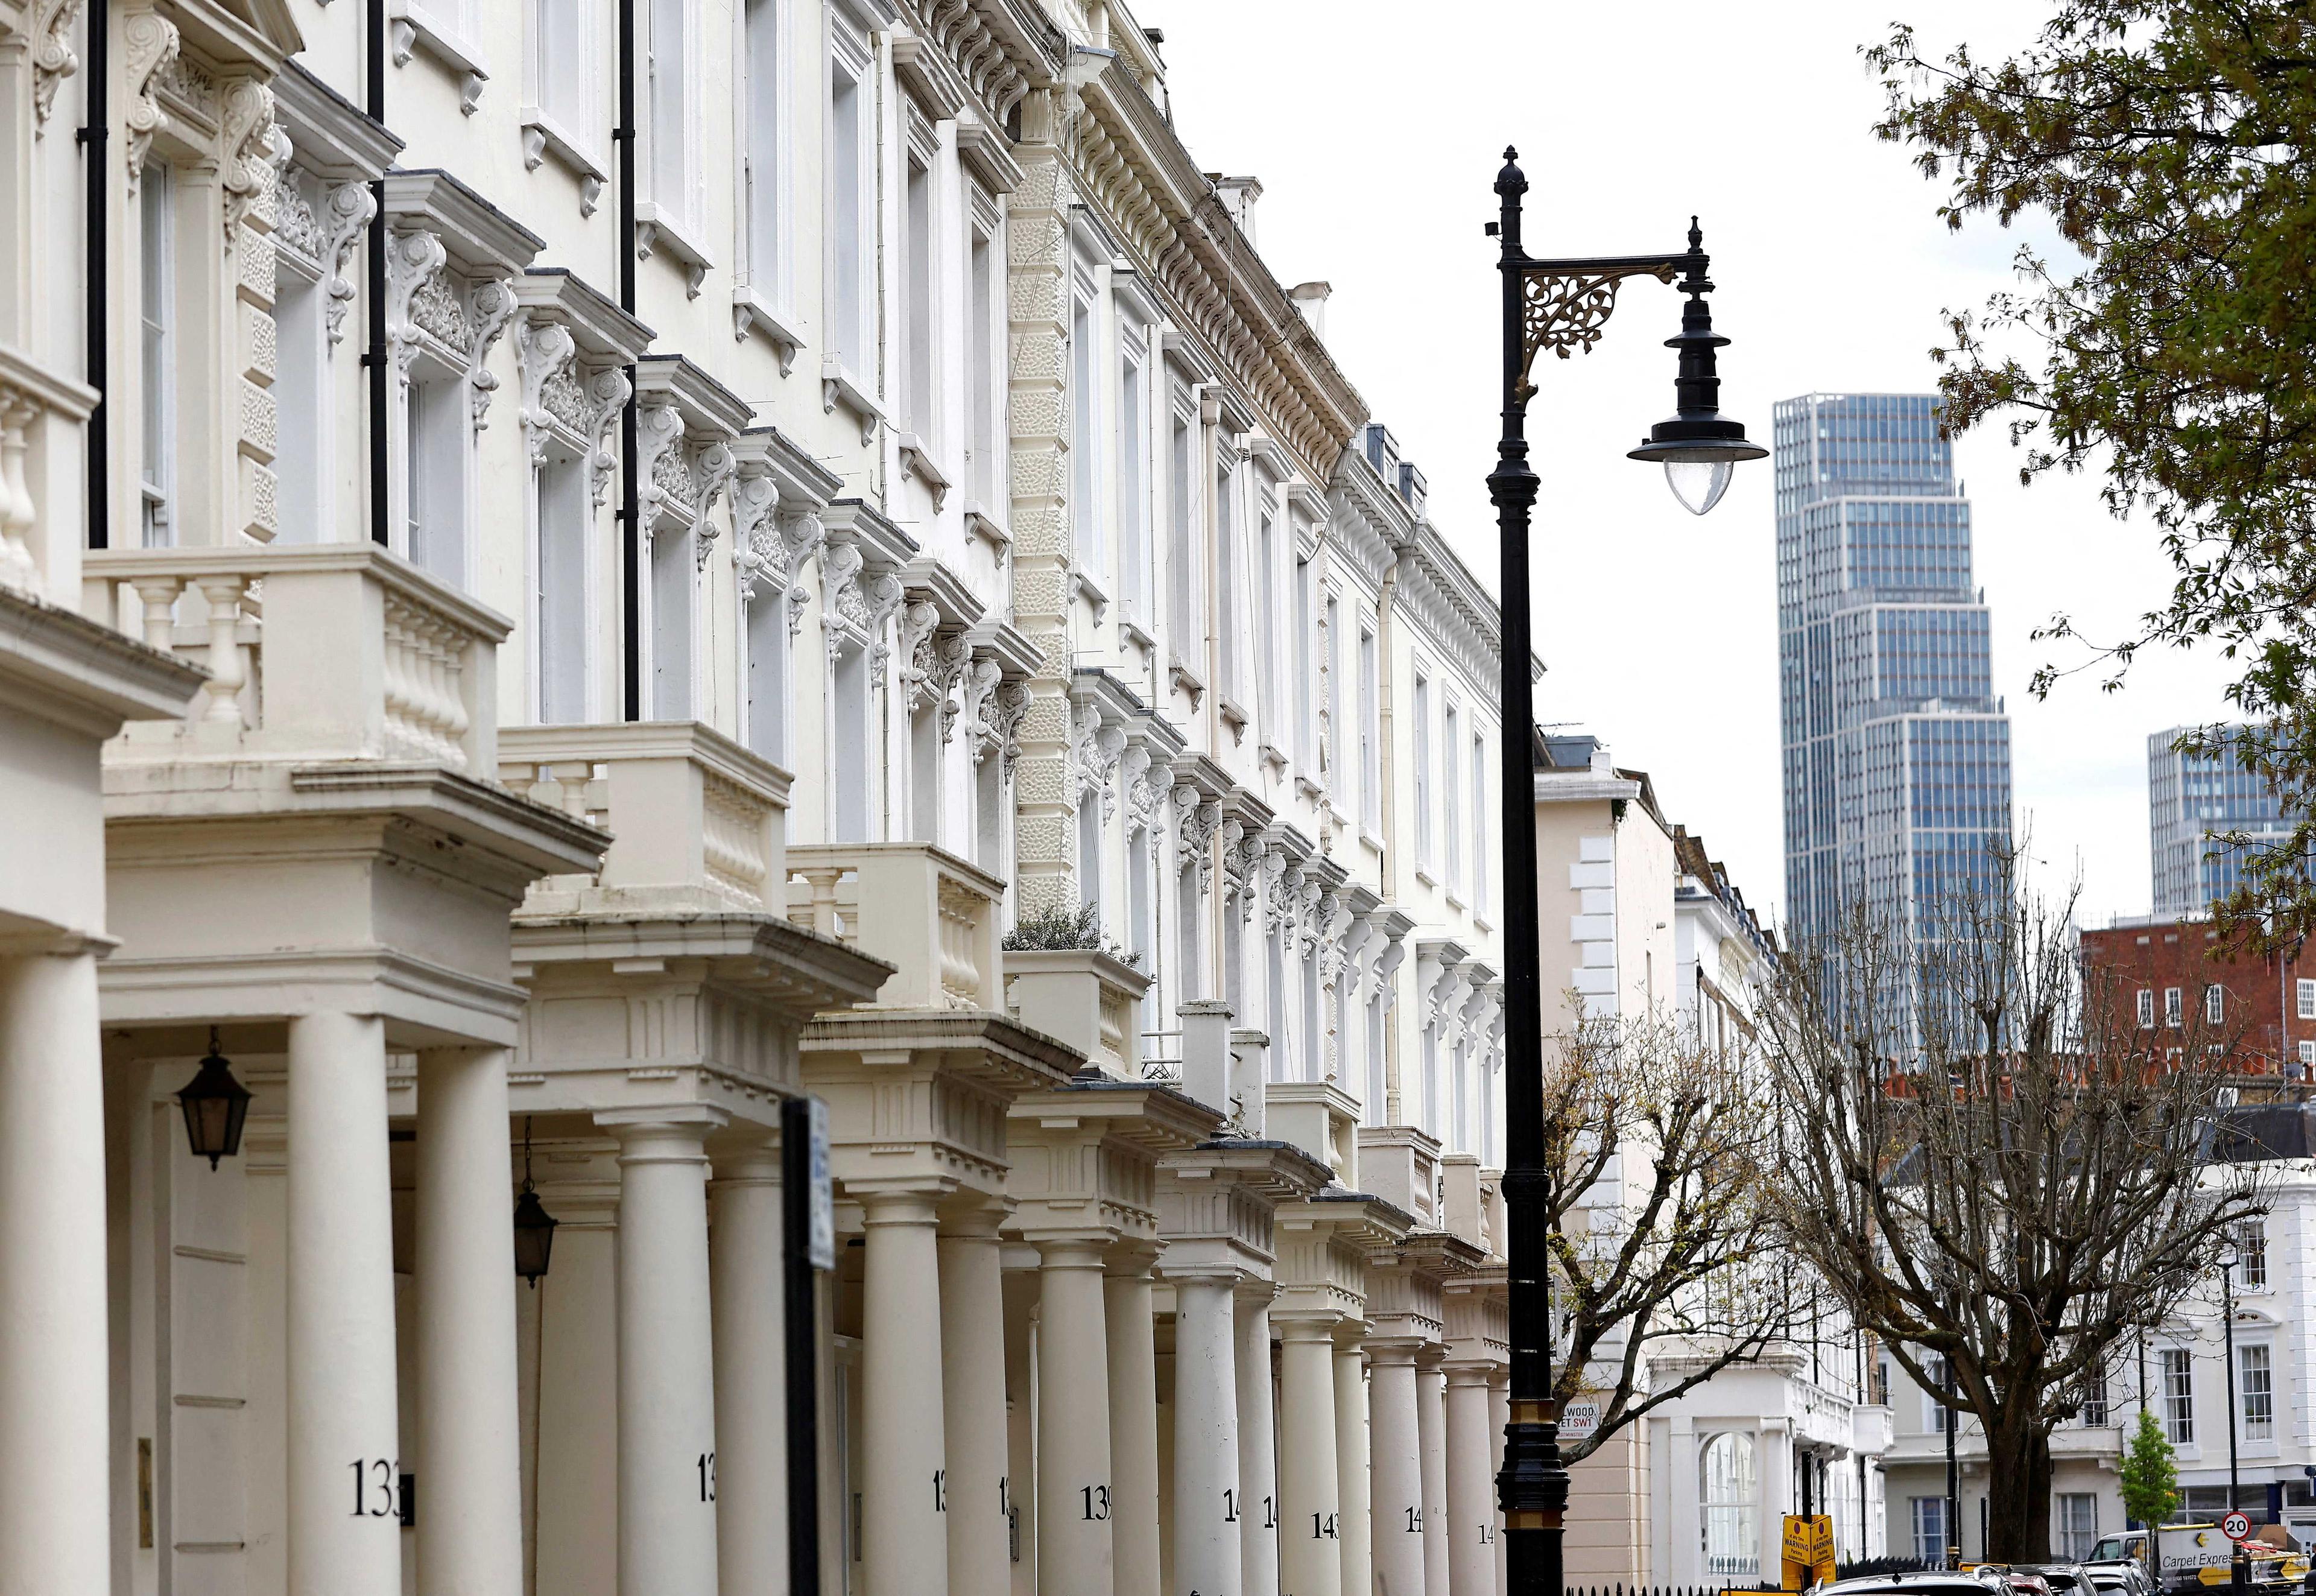 Apartment blocks are seen behind traditional housing in London, Britain, April 16. Photo: Reuters